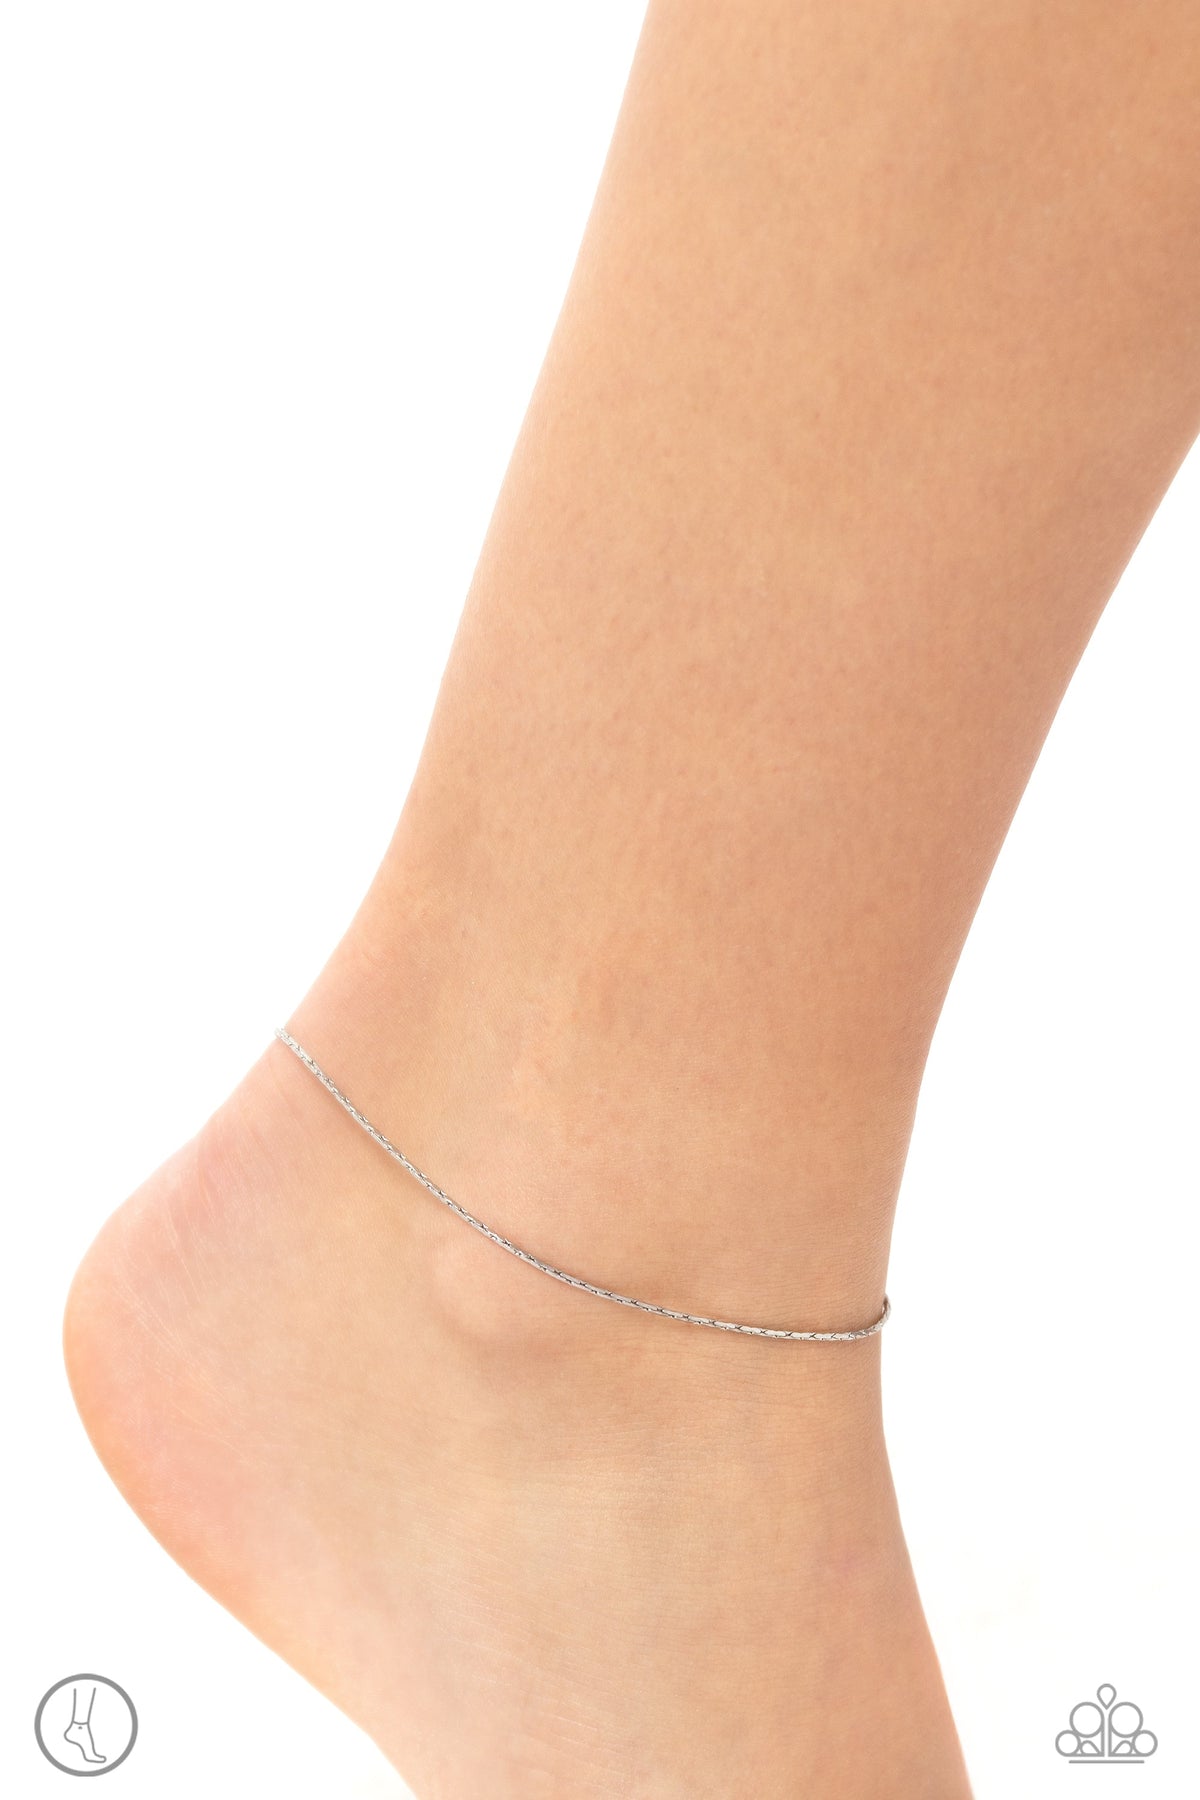 High-Tech Texture Silver Anklet - Paparazzi Accessories-on model - CarasShop.com - $5 Jewelry by Cara Jewels